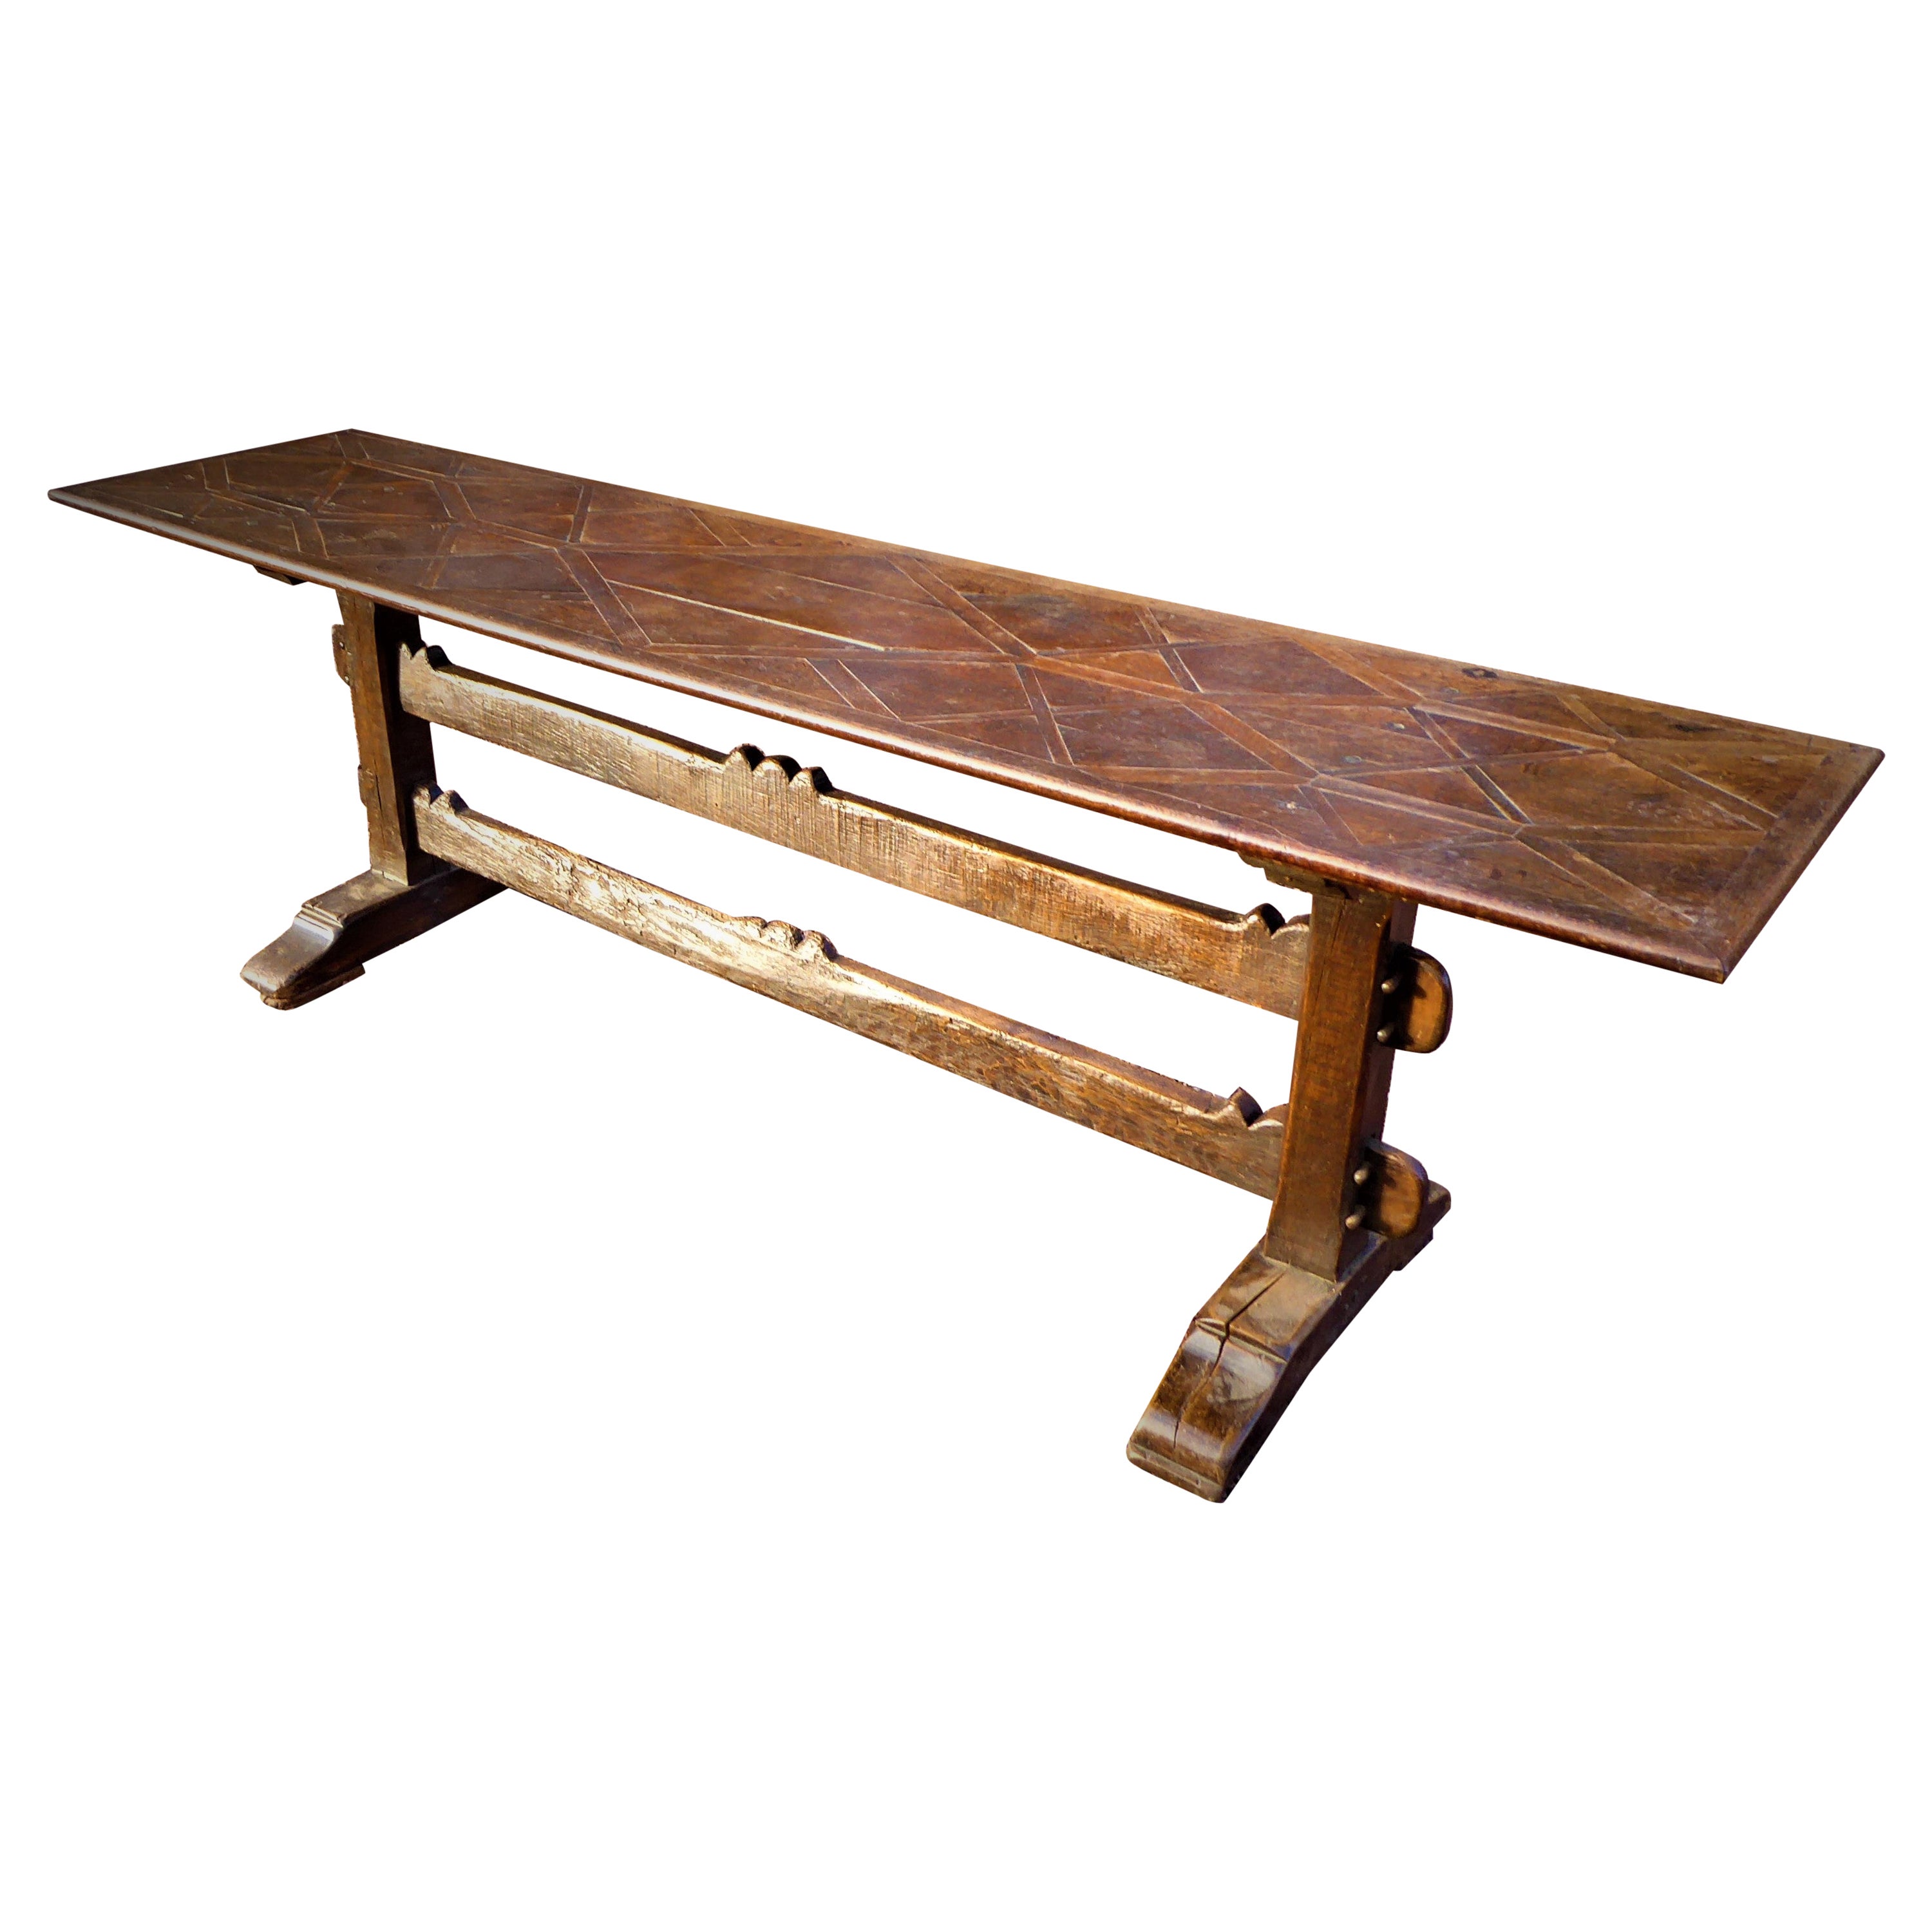 What is the narrowest A dining table can be?